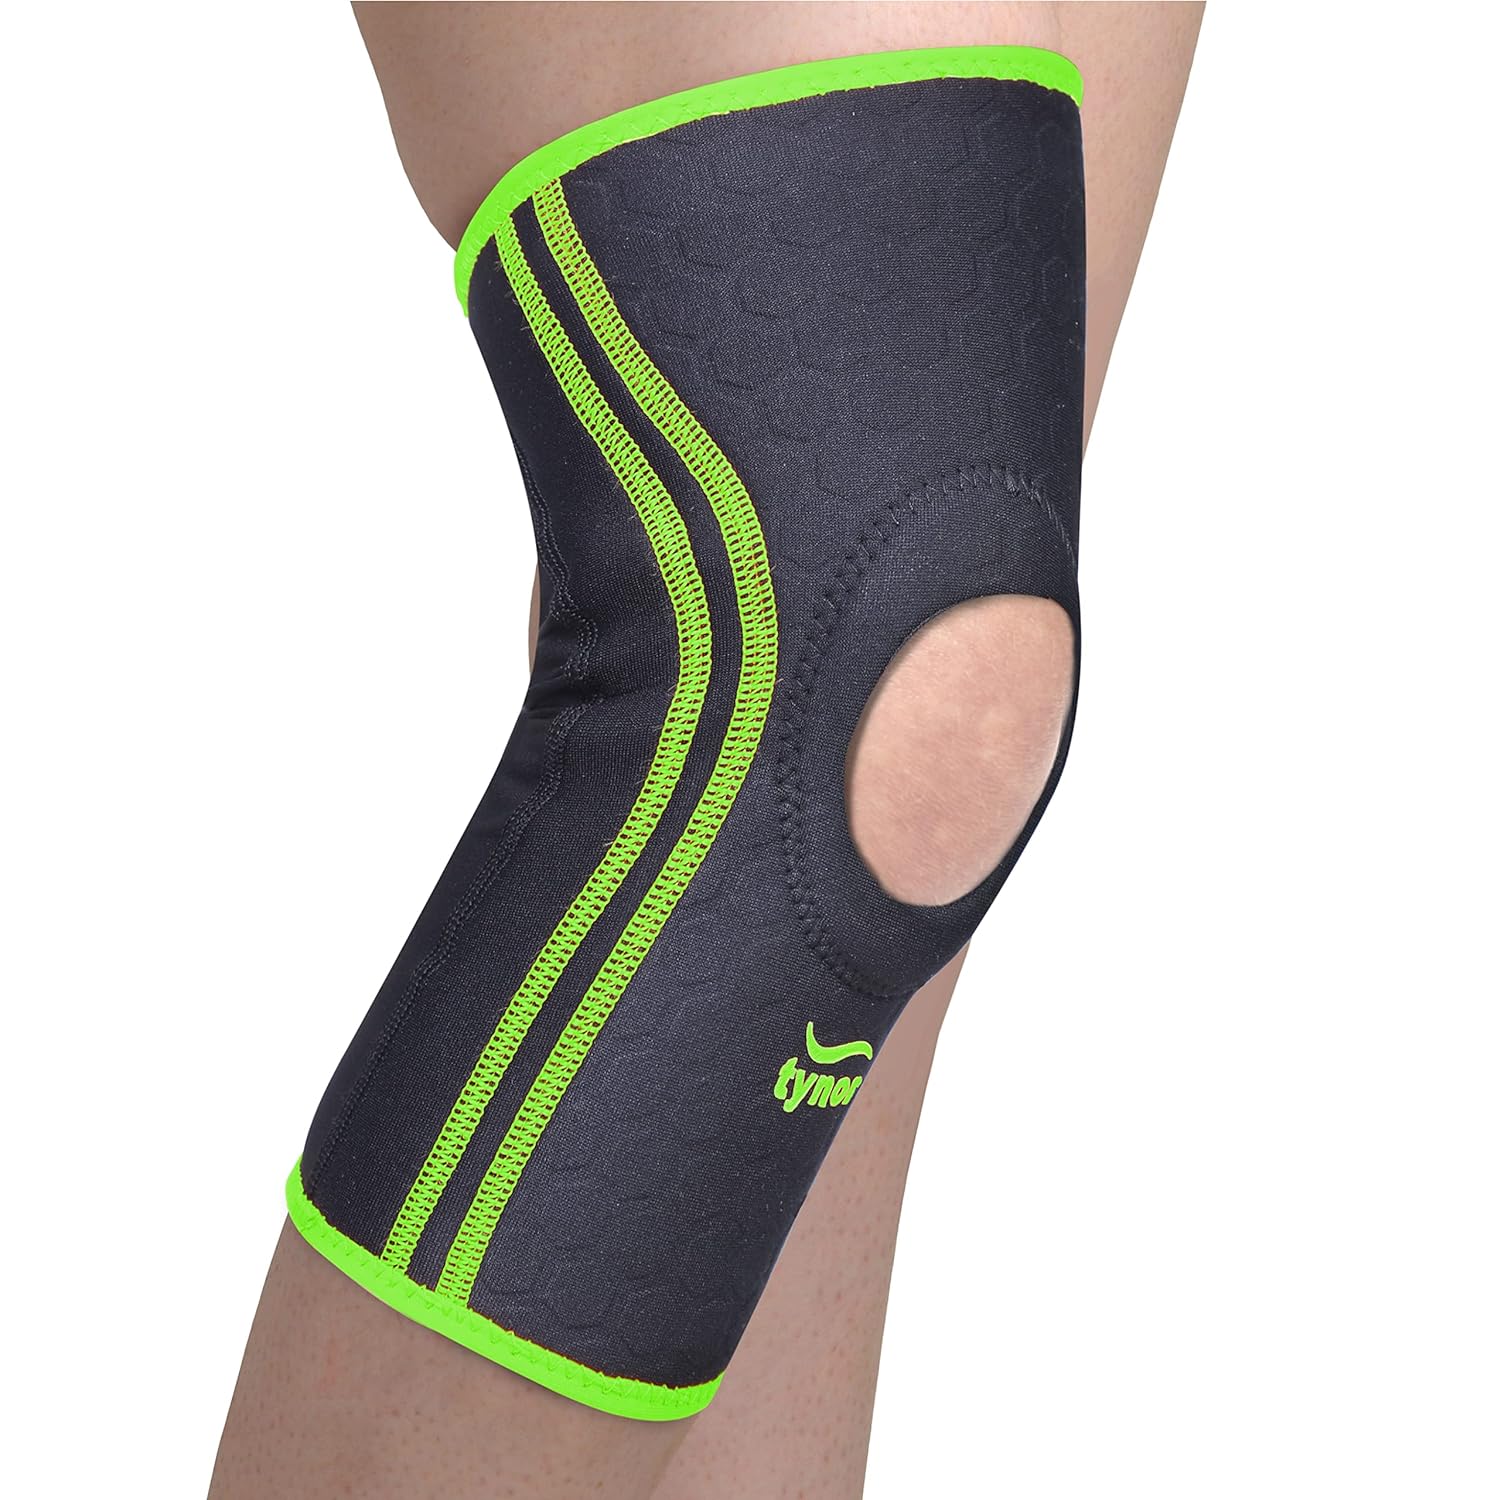 Supports & Splints : Buy Knee Support Pain Relief Products Online